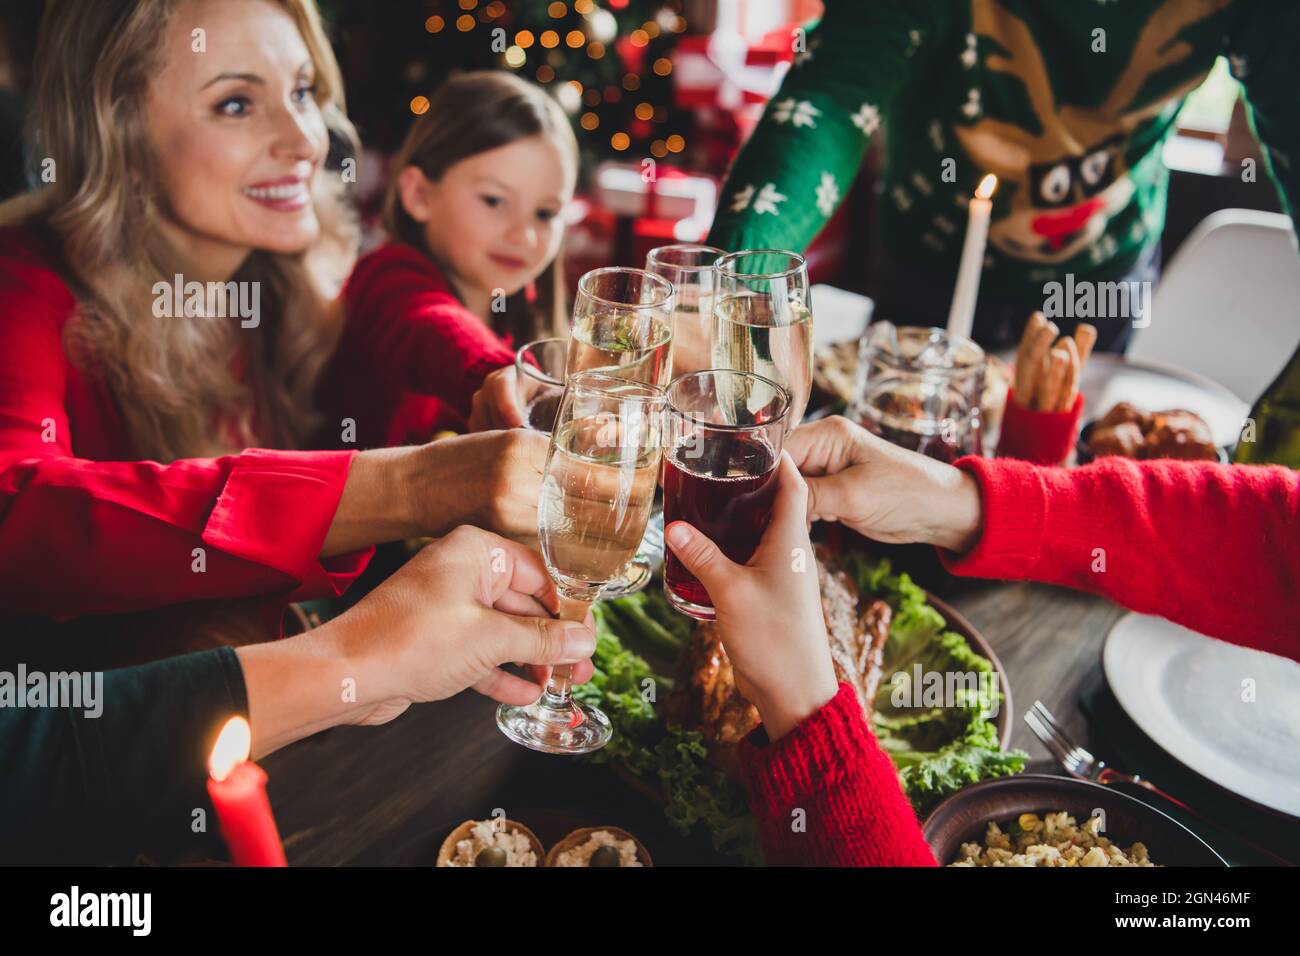 Top view of family celebrating holidays together drinking champagne at festive table eating tasty dishes Stock Photo